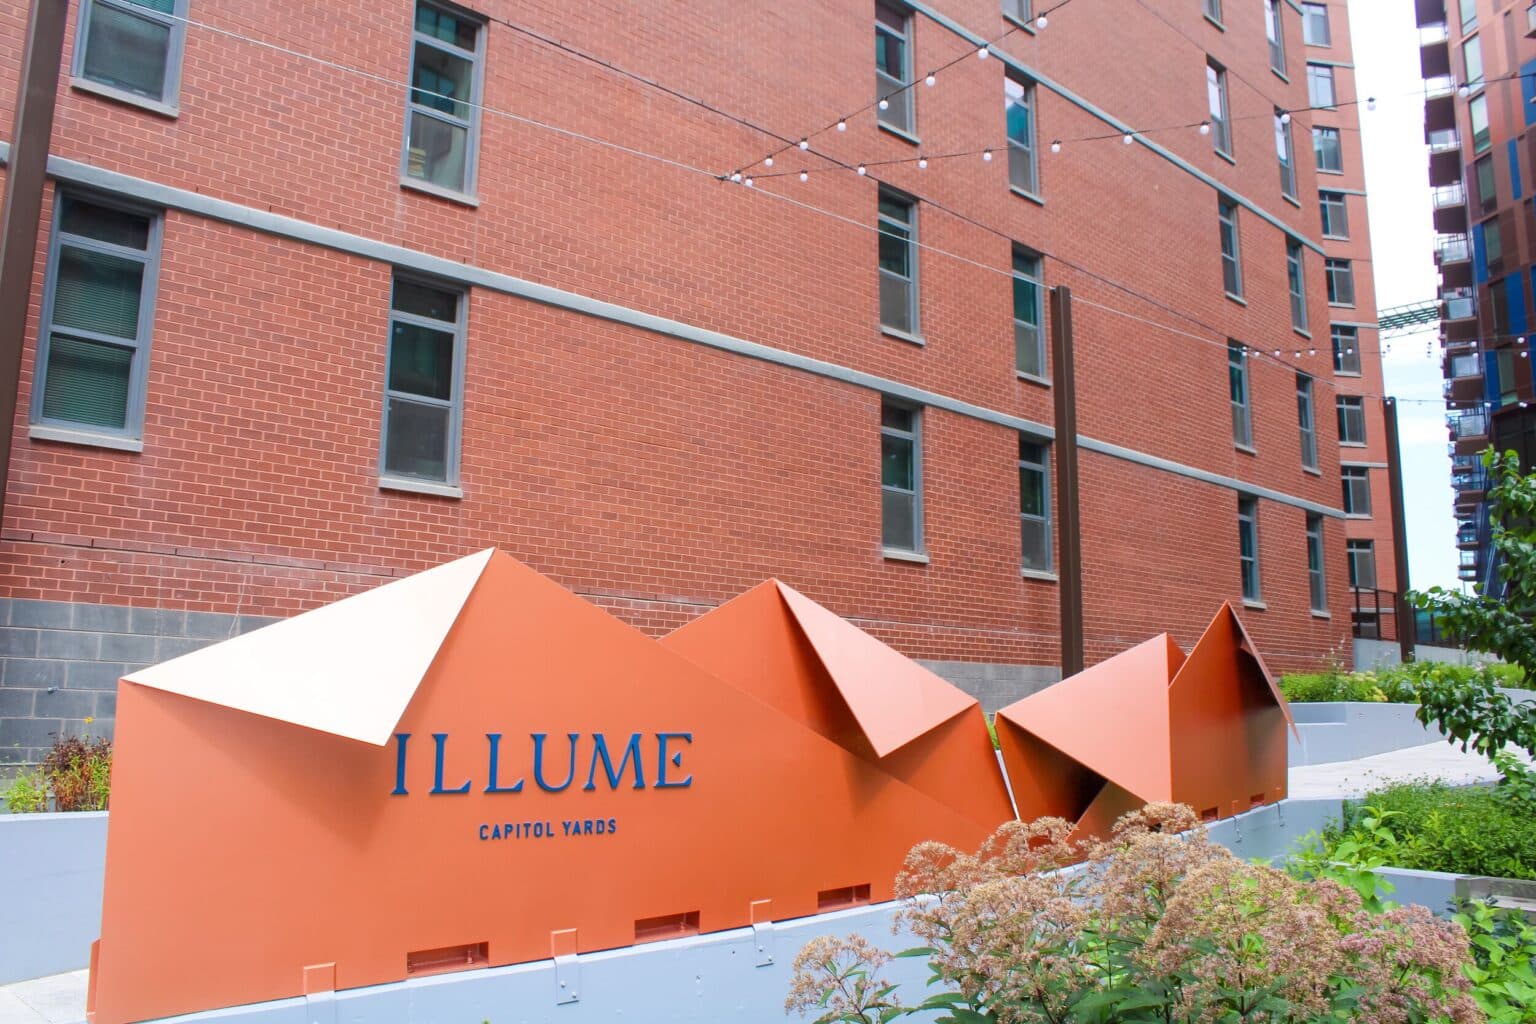 The Design of the Finished Illume Structure